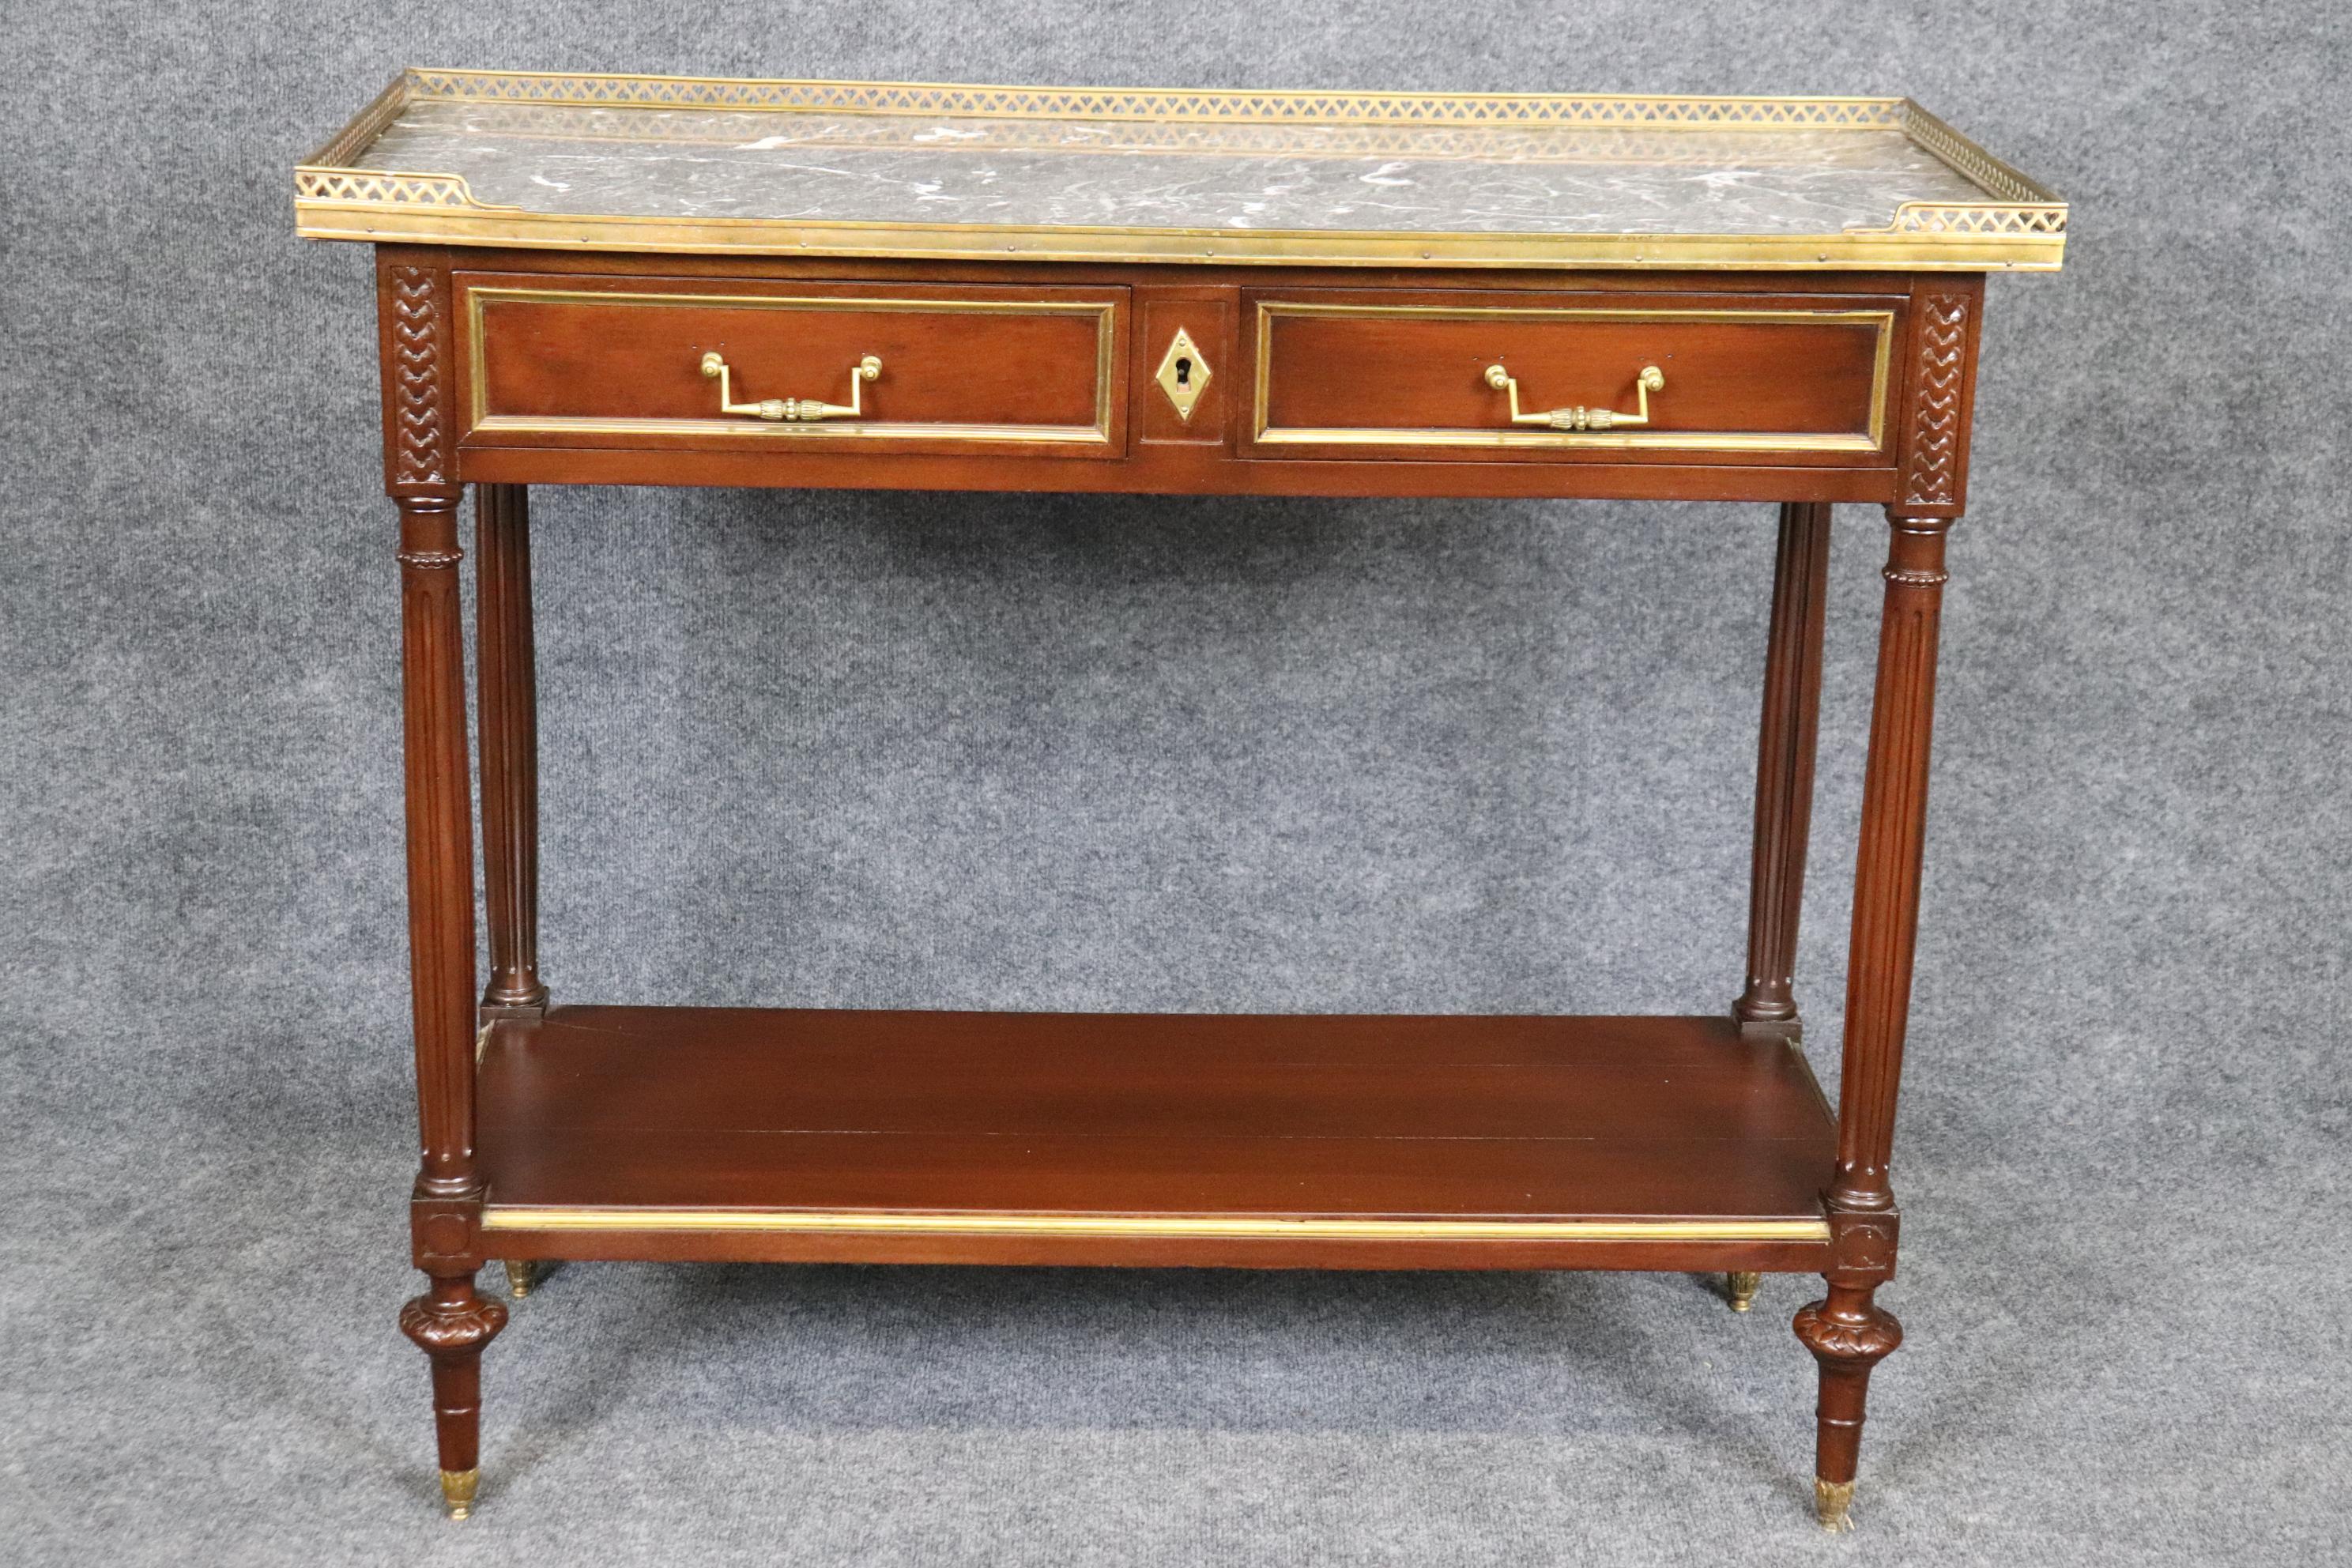 Fine Quality Directoire Maison Jansen Attributed Marble Top Console Table Buffet In Good Condition For Sale In Swedesboro, NJ